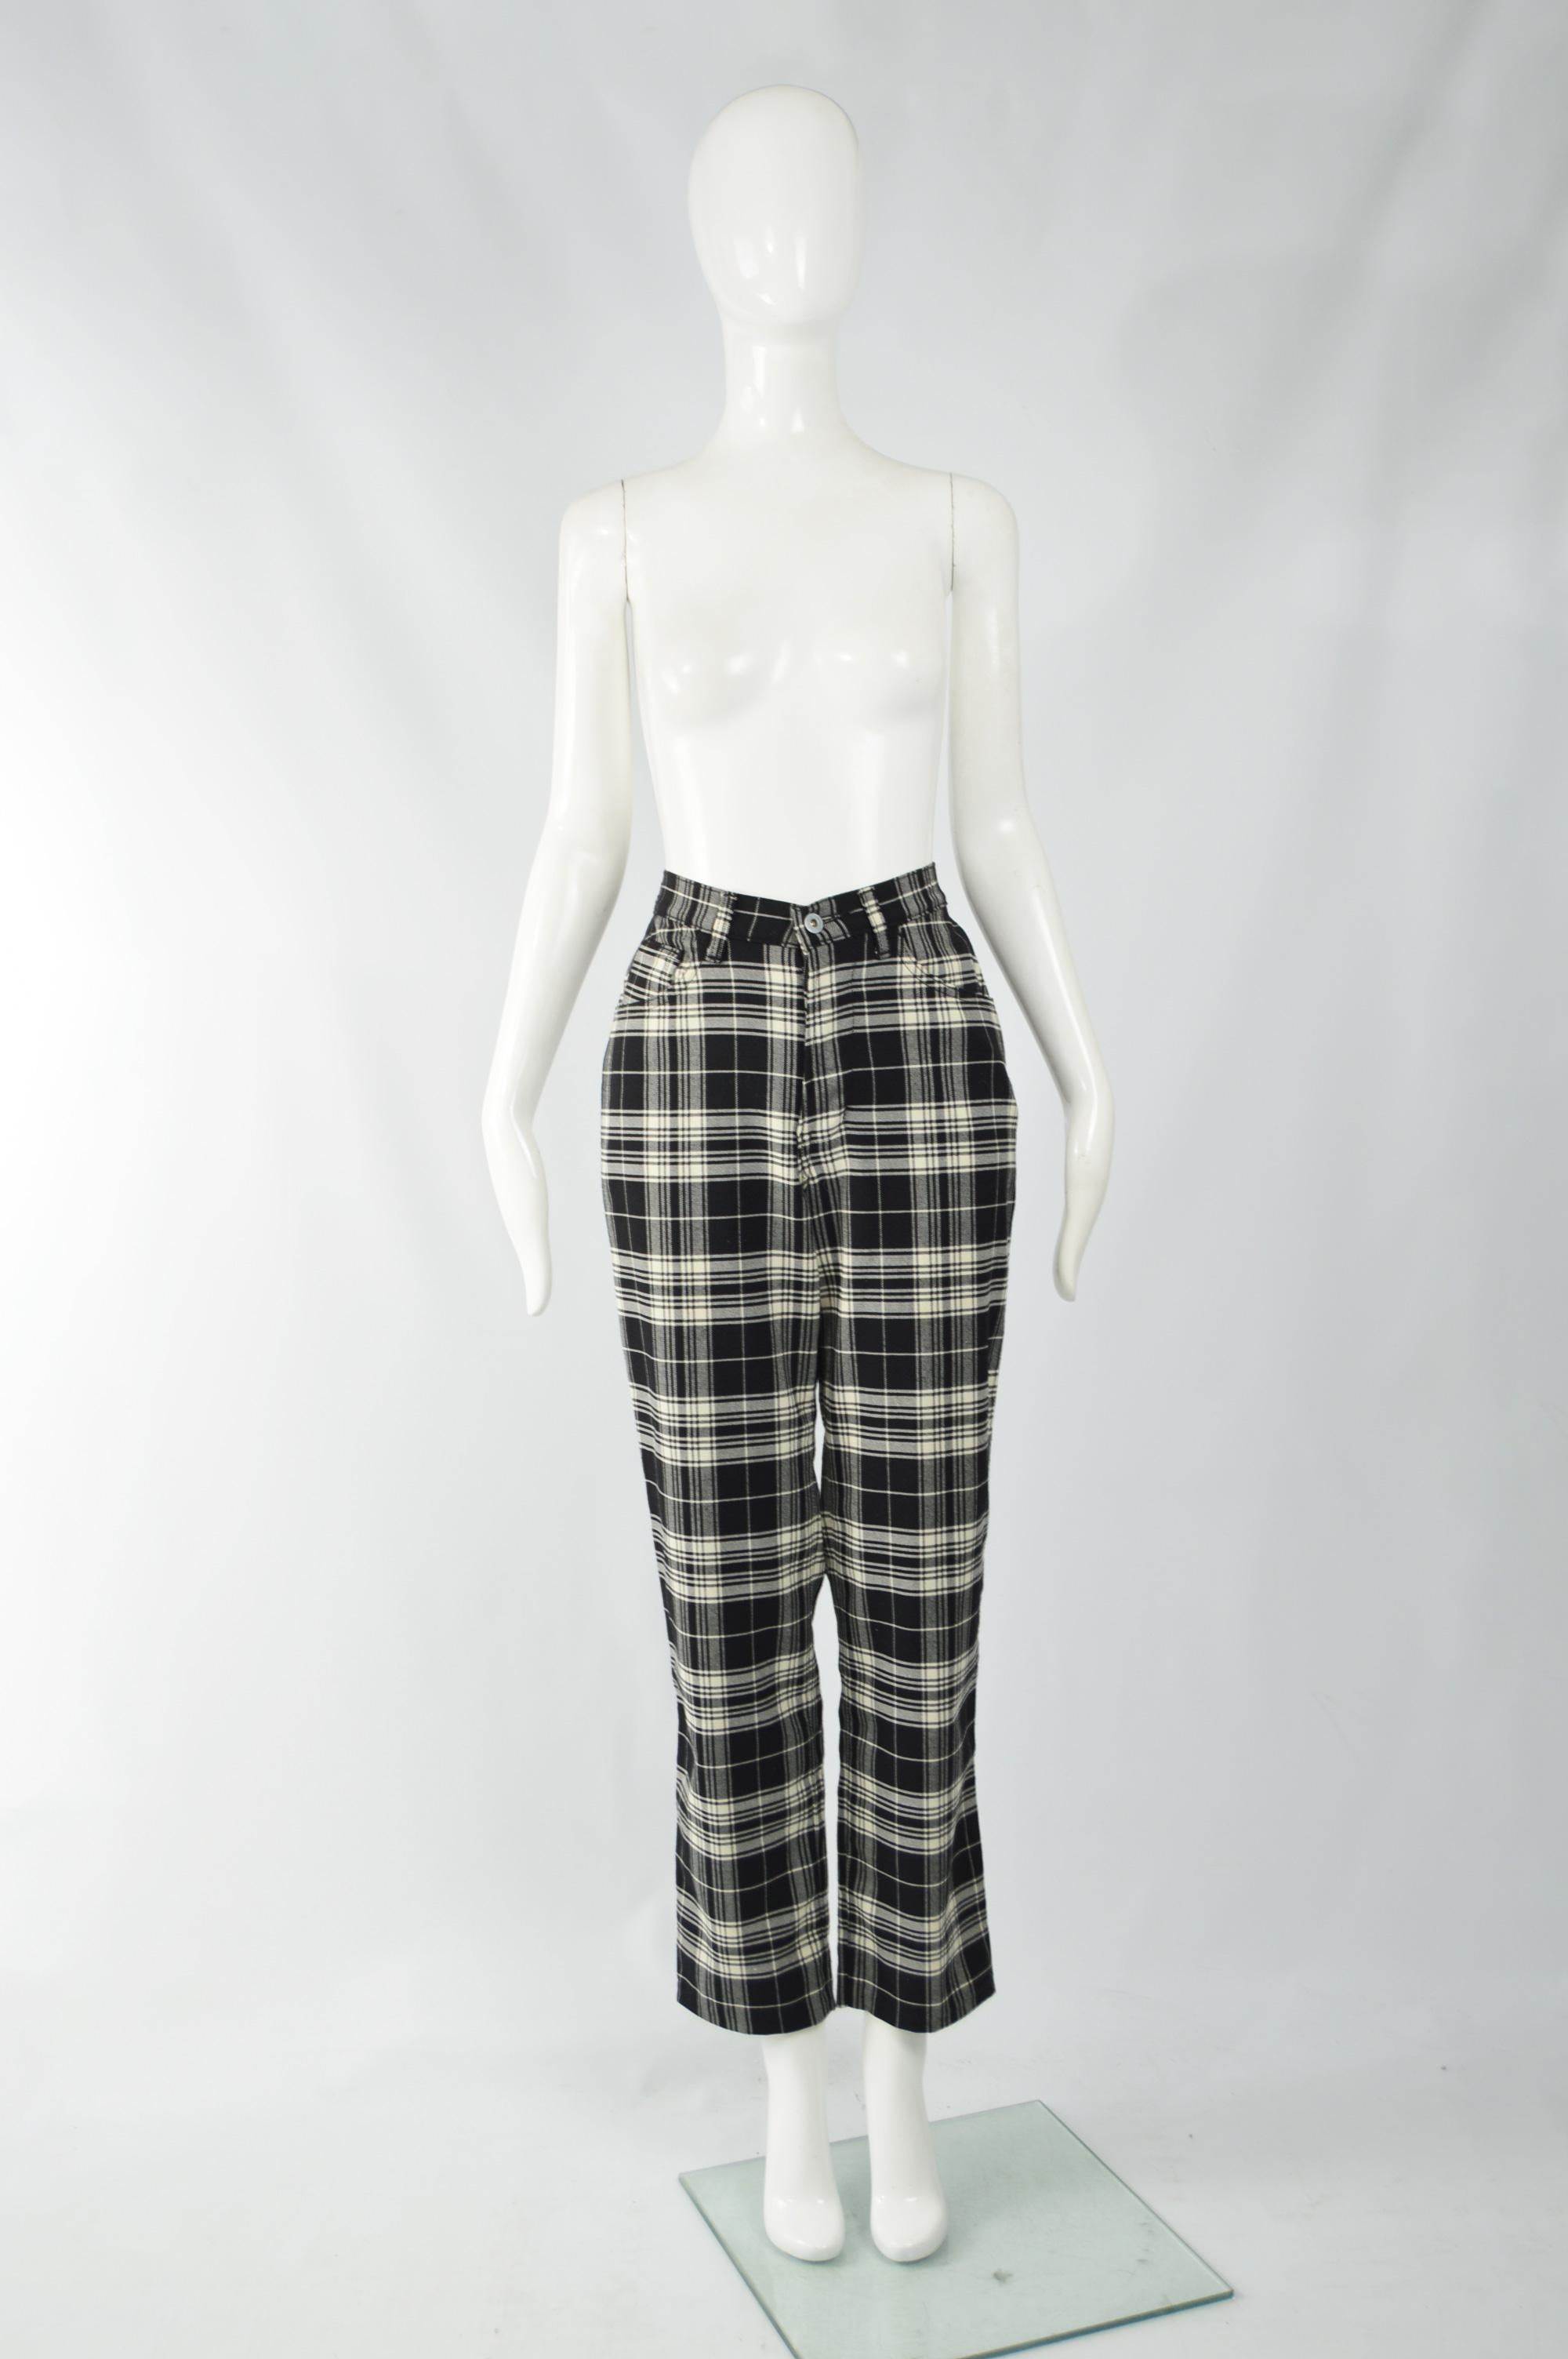 A chic pair of vintage womens pants from the 80s by luxury British fashion house, Joseph. In a black and white tartan checked, wool blend fabric with a high waist.  

Size: Marked EU 38 which equates to a UK 10 / US 6 
Waist - 28” / 71cm
Hips - 36”